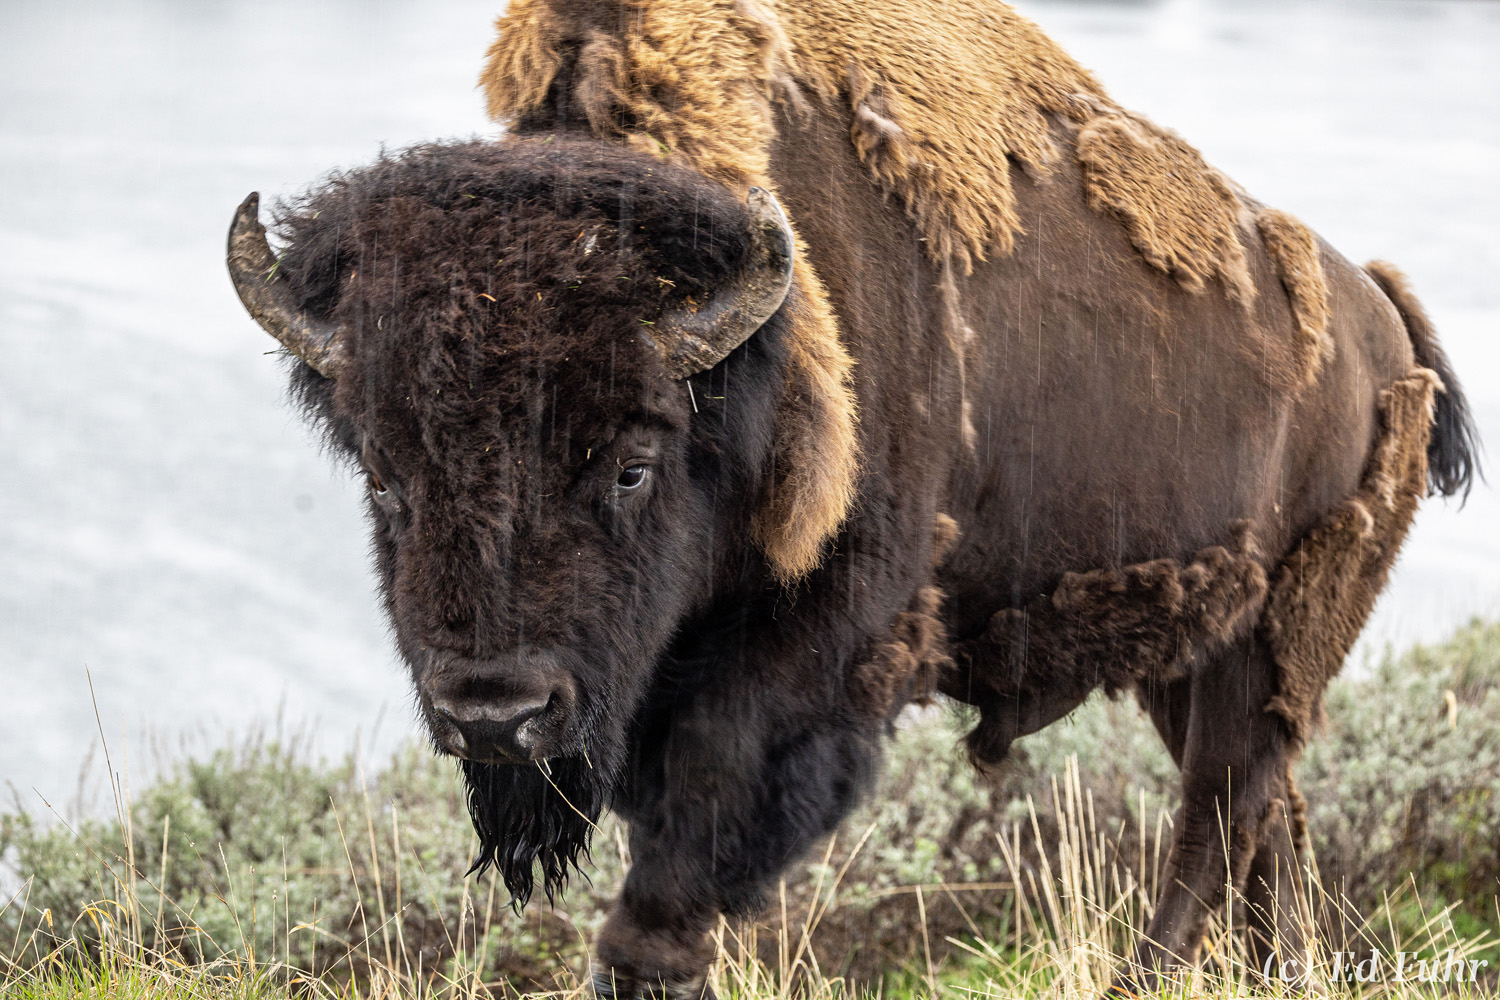 A bison approaches slowly through a gentle spring shower.  The winter has been long and many bison did not survive; often 10%...